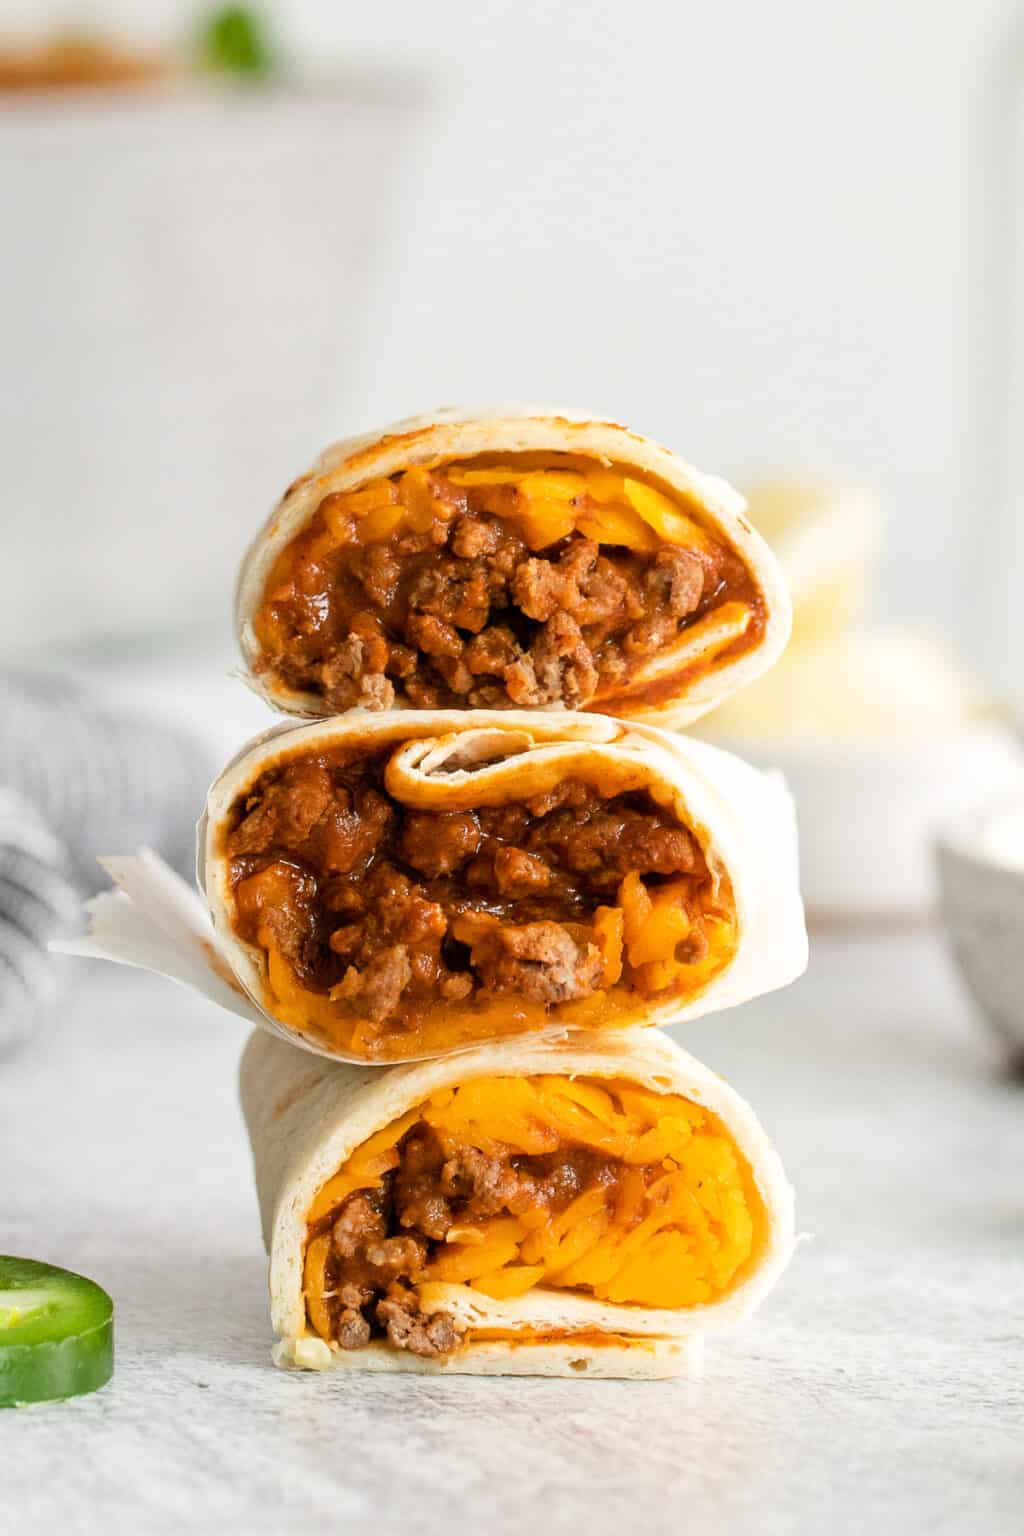 Copycat Taco Bell Chili Cheese Burrito - The Cheese Knees